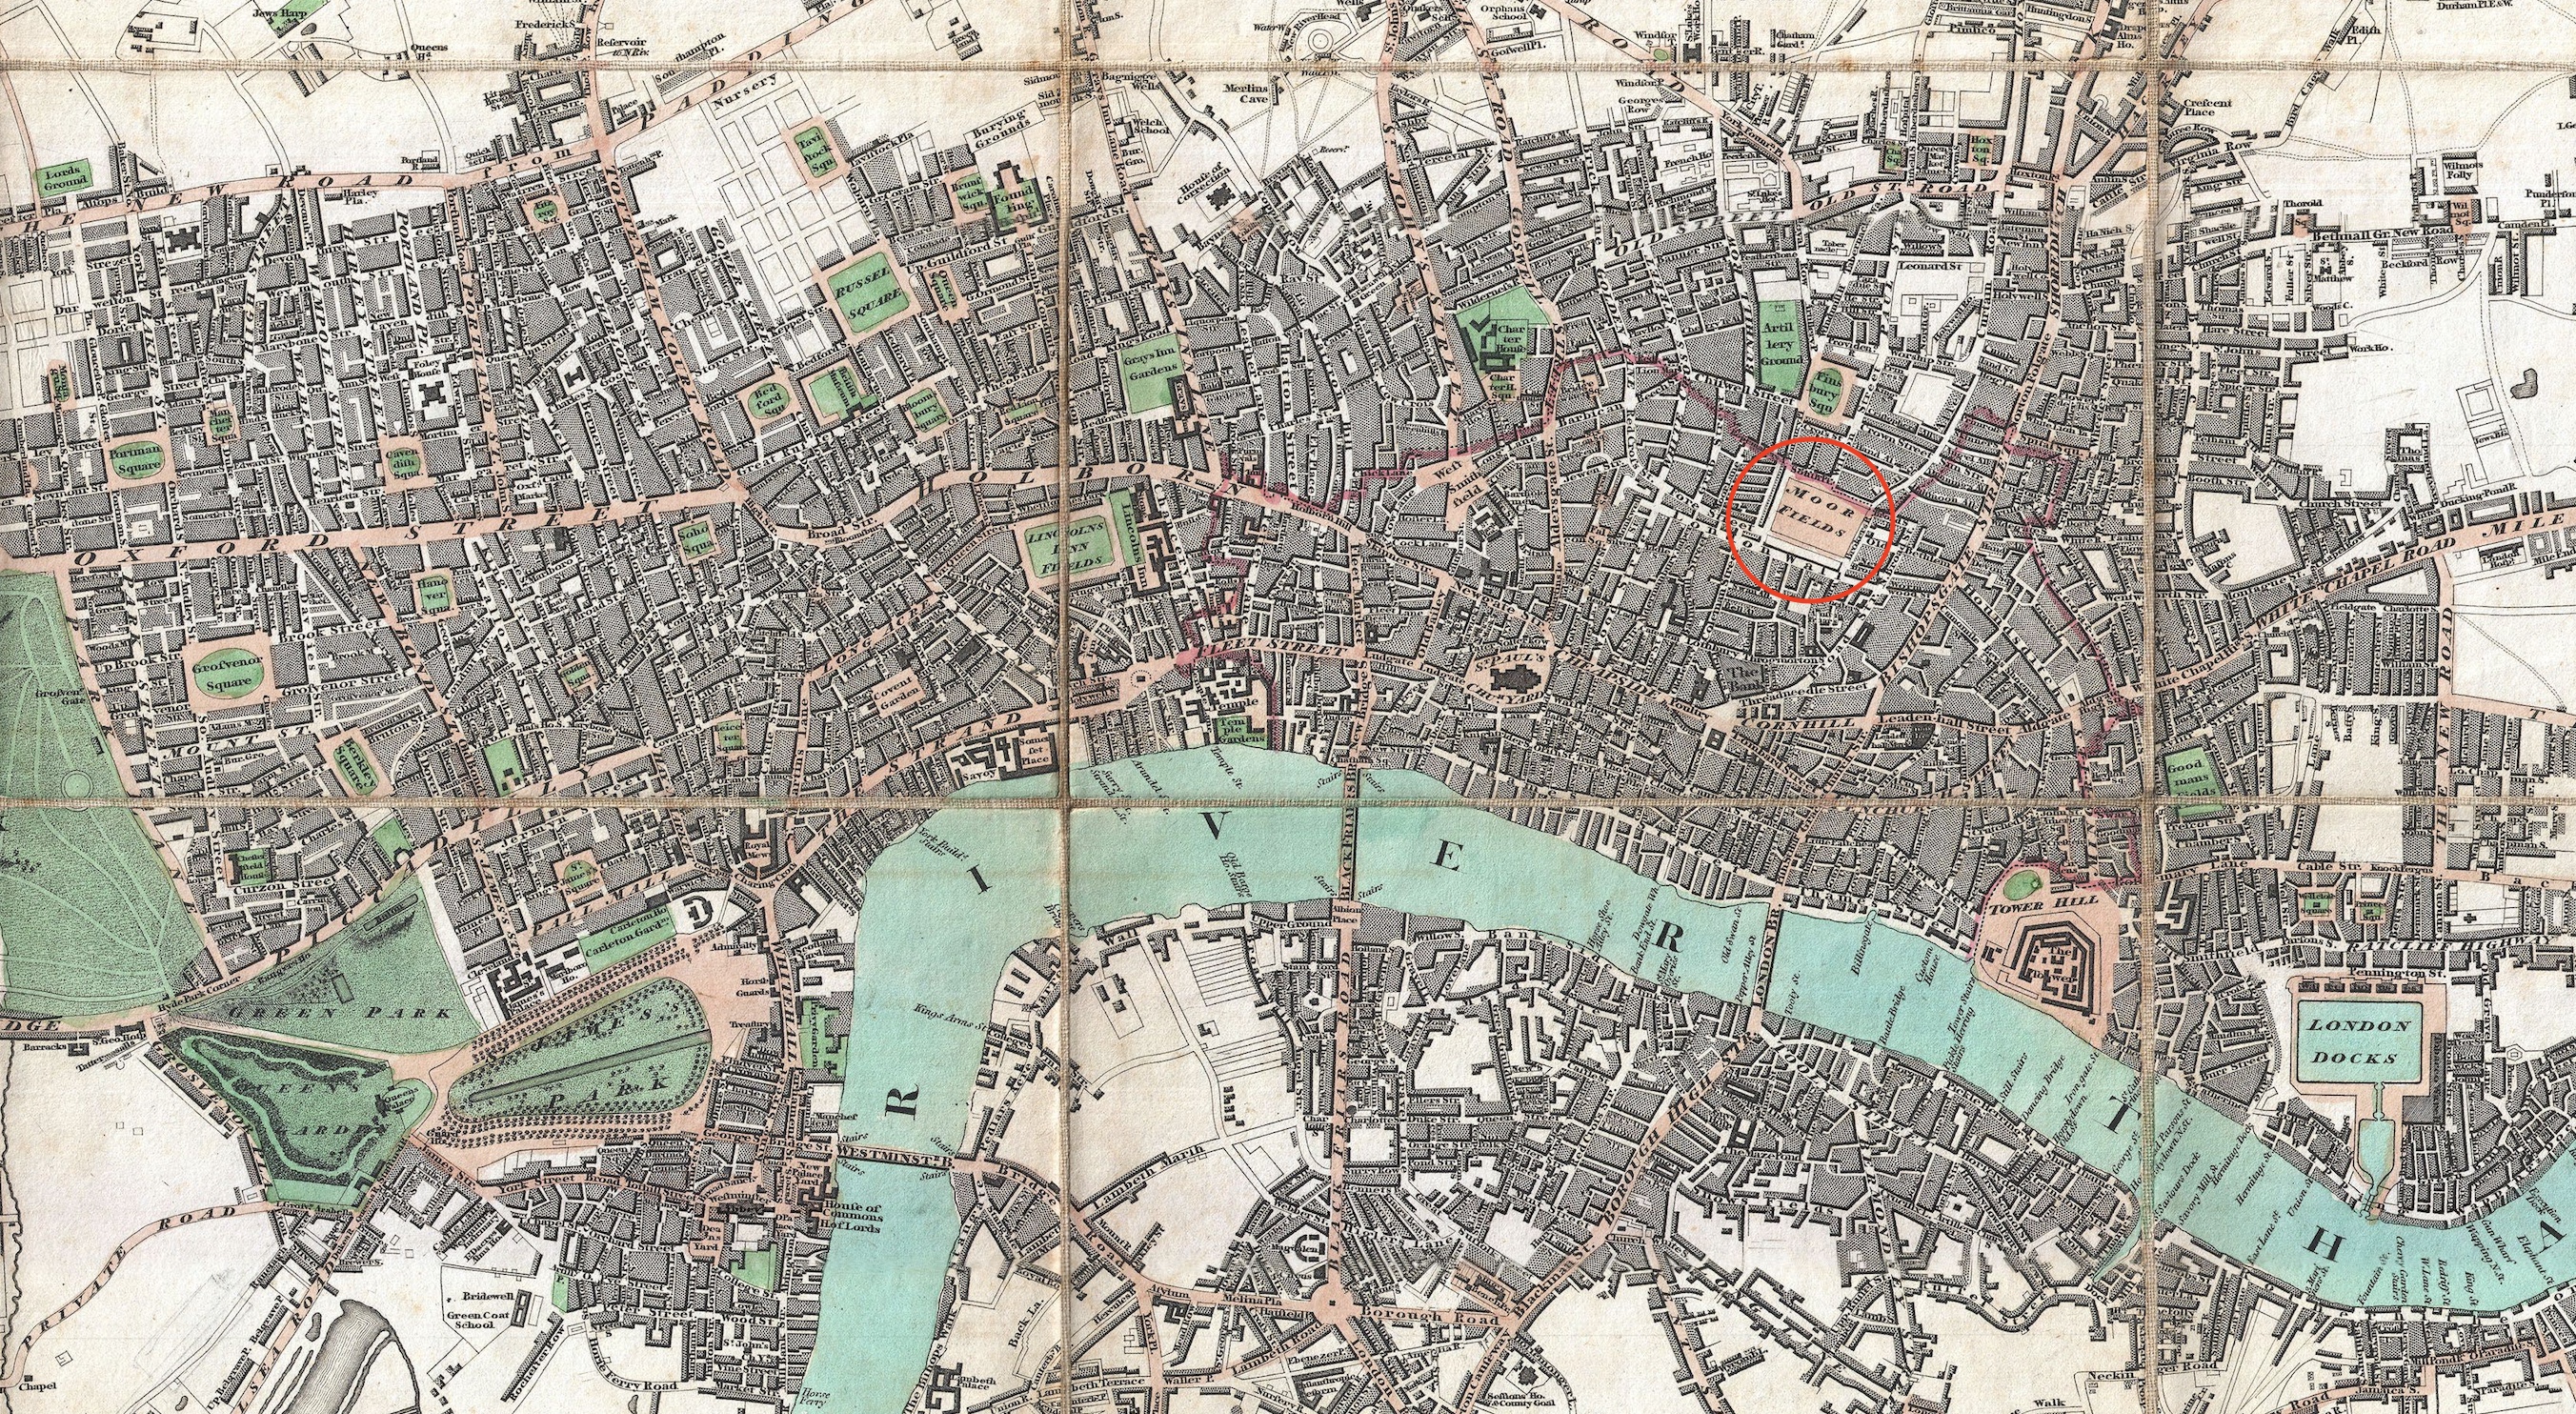 Moorfields area of London, Edward Mogg’s 1806 map. Click to enlarge.